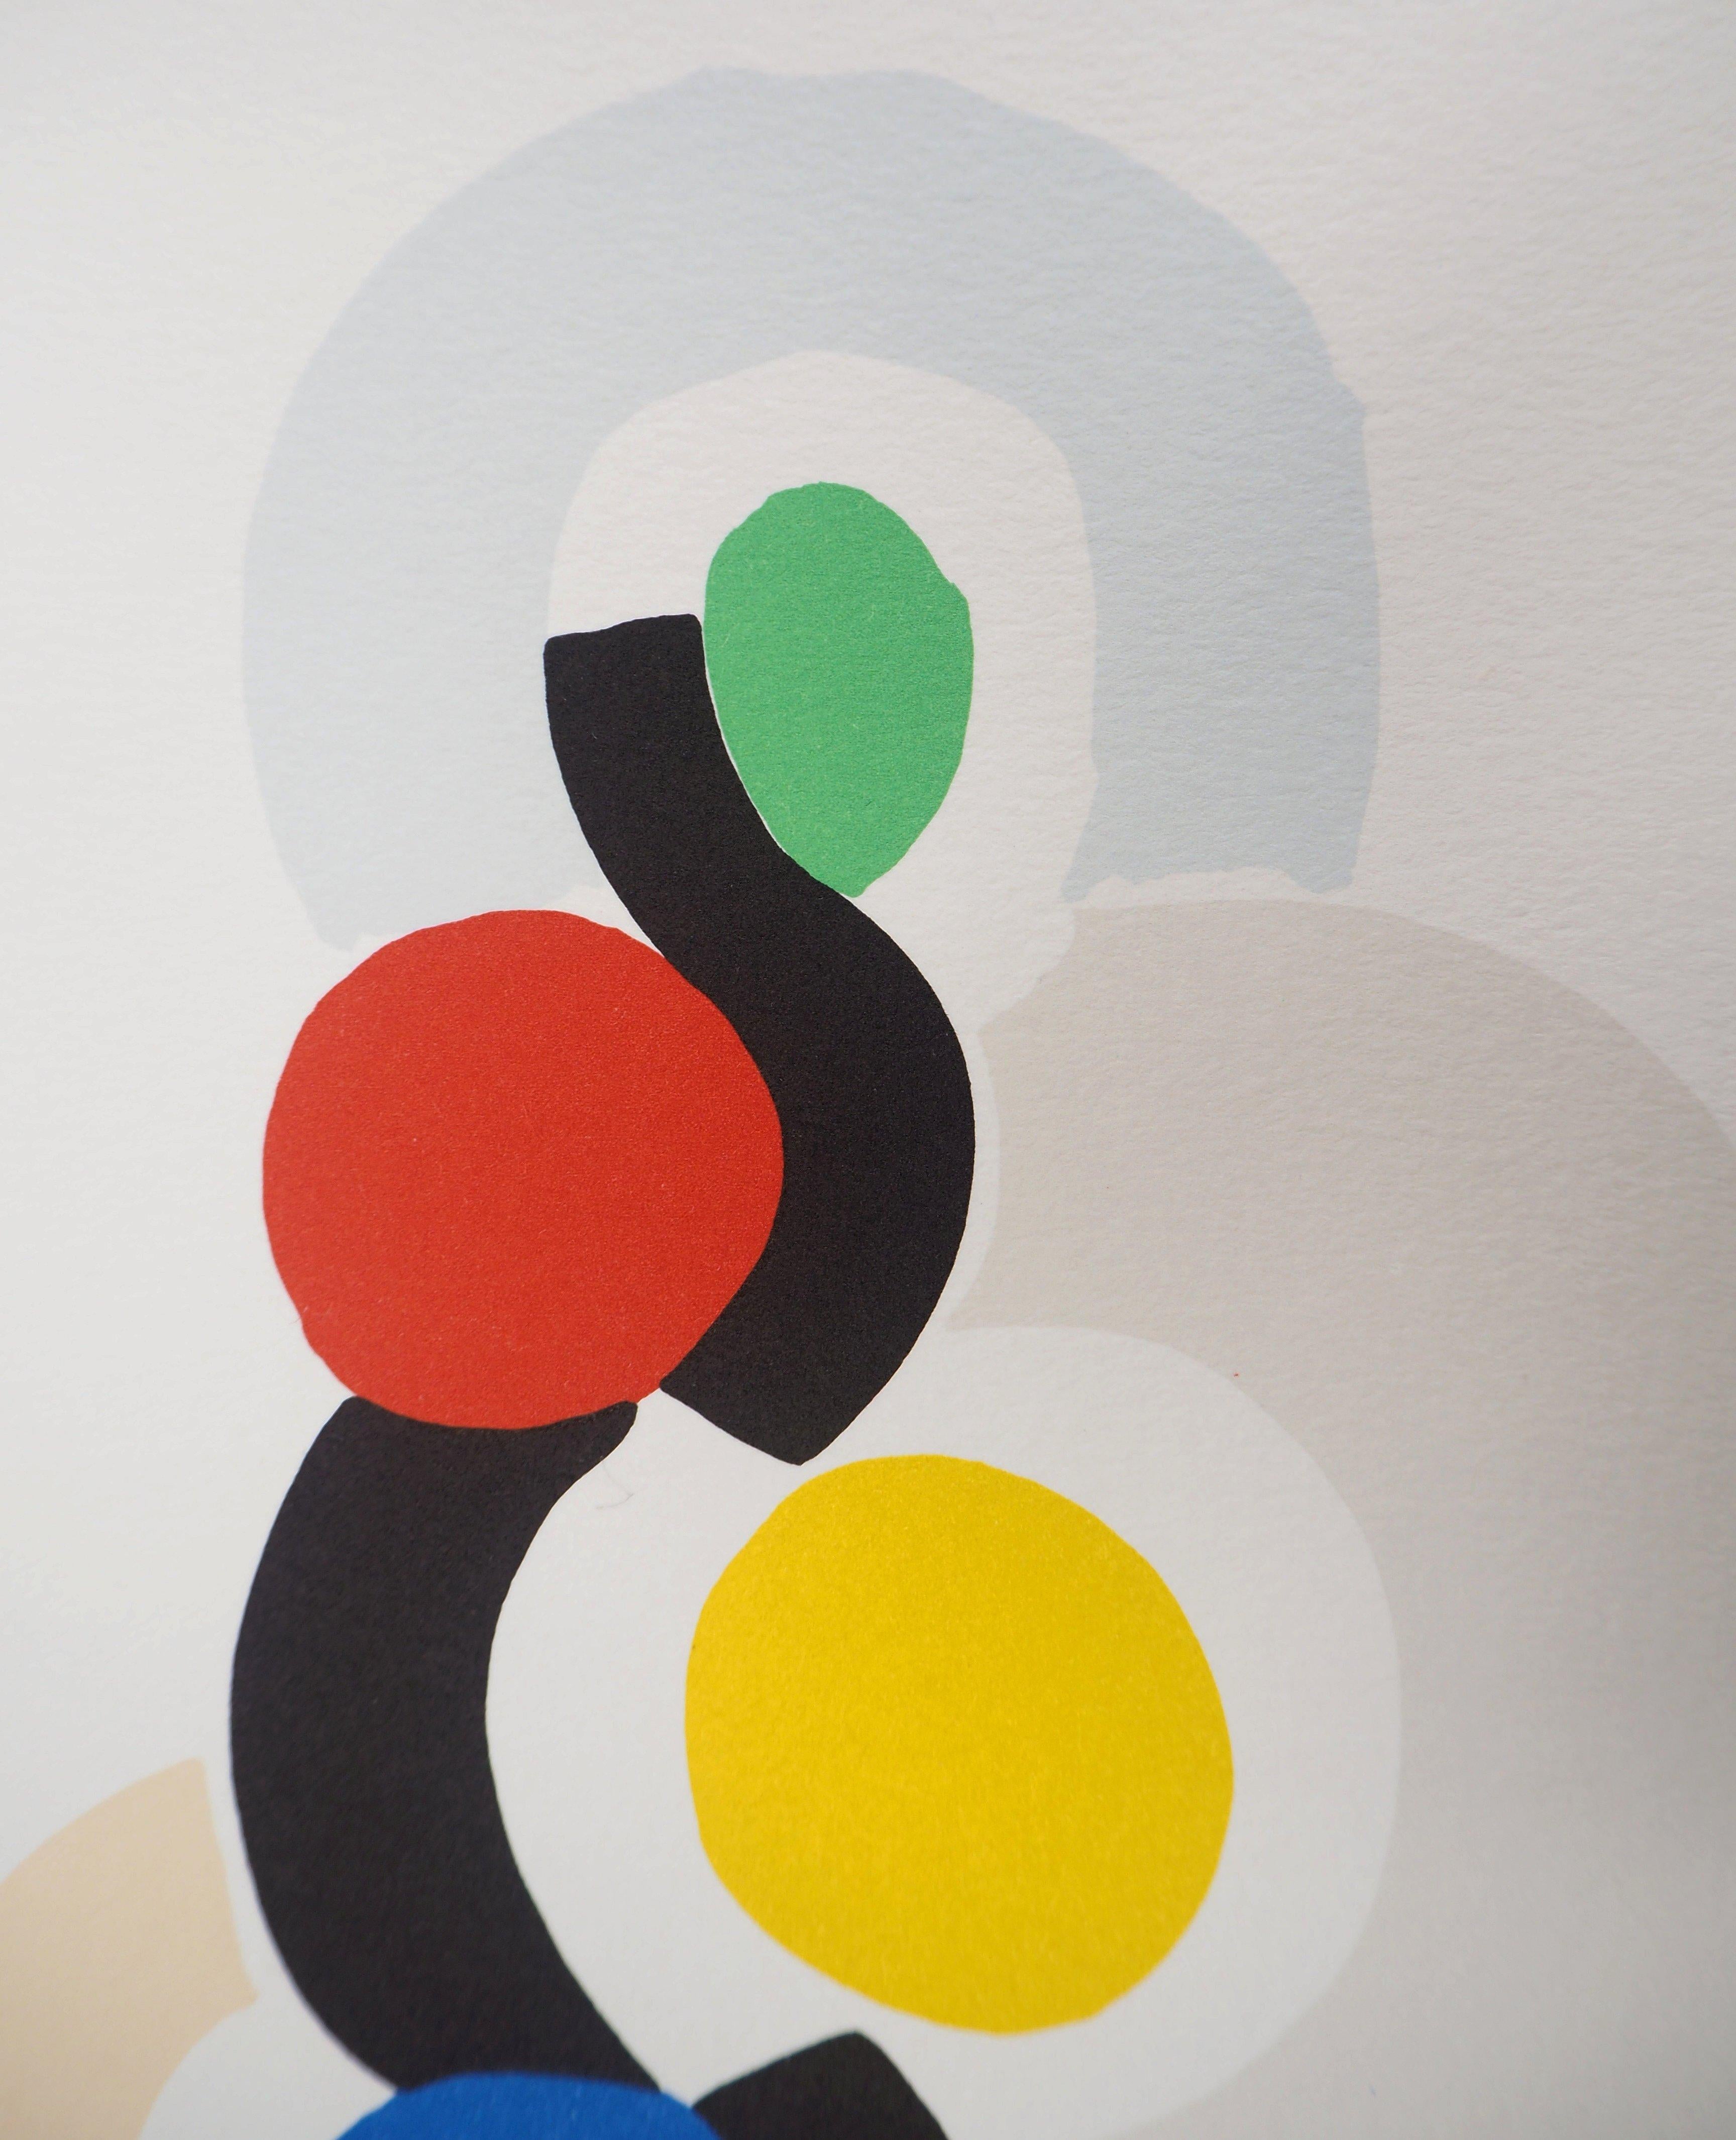 Sonia DELAUNAY
 Rythm and Dance

Lithograph after a painting
Printed signature in the plate
Numbered /600 
On vellum paper 40 x 30 cm (c. 15.7 x 11.8 in)
ArtCurial edition, 1994

Excellent condition